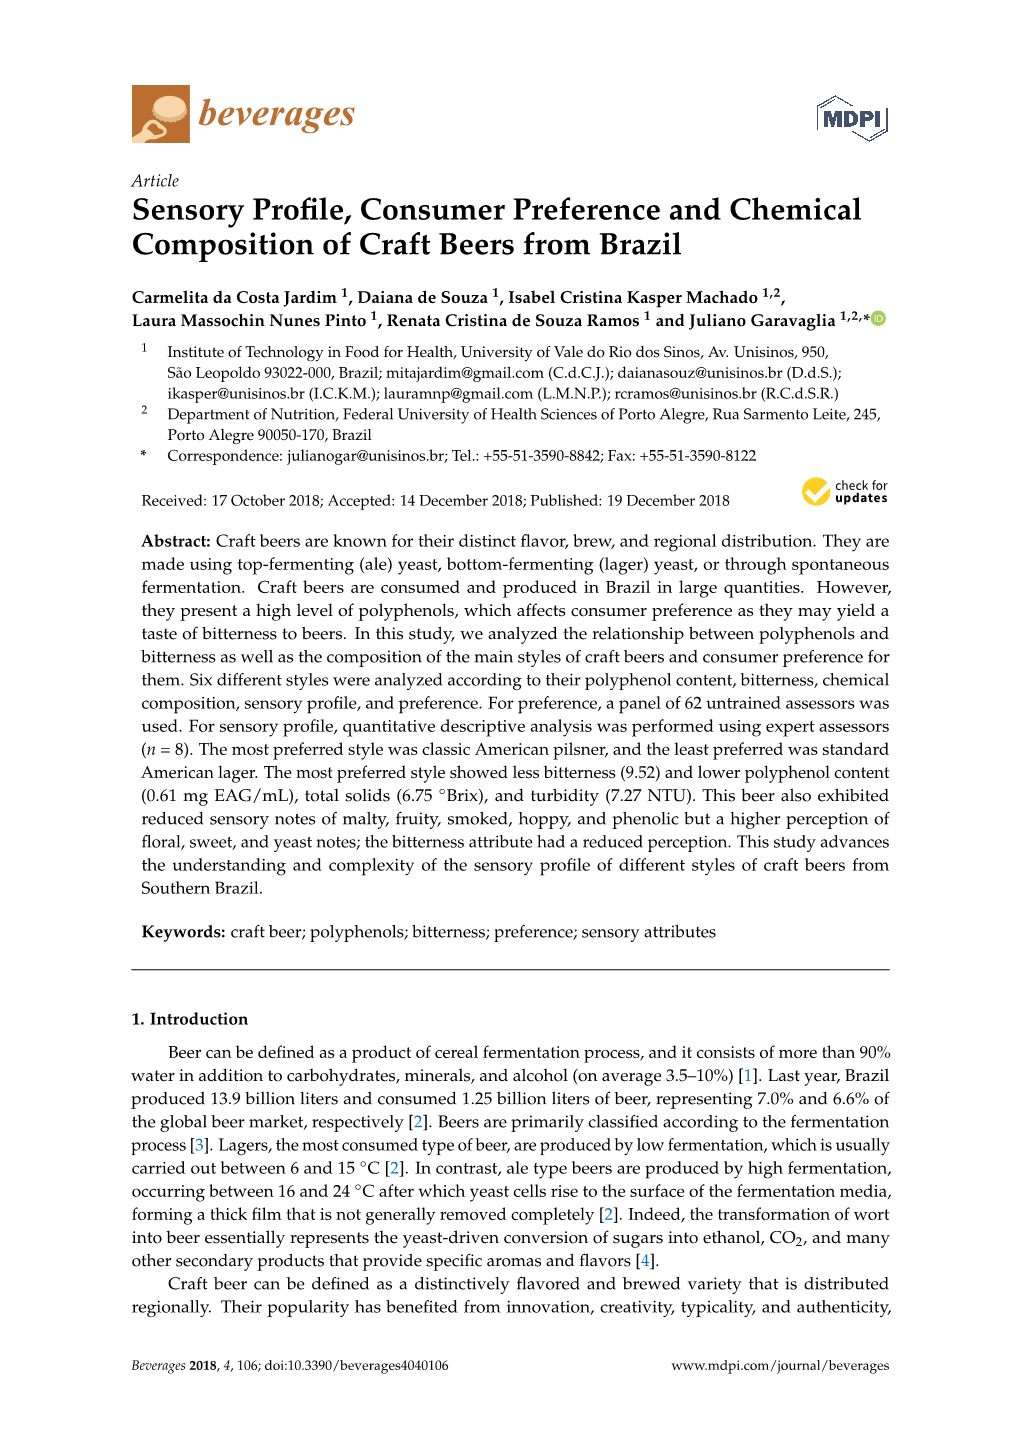 Sensory Profile, Consumer Preference and Chemical Composition of Craft